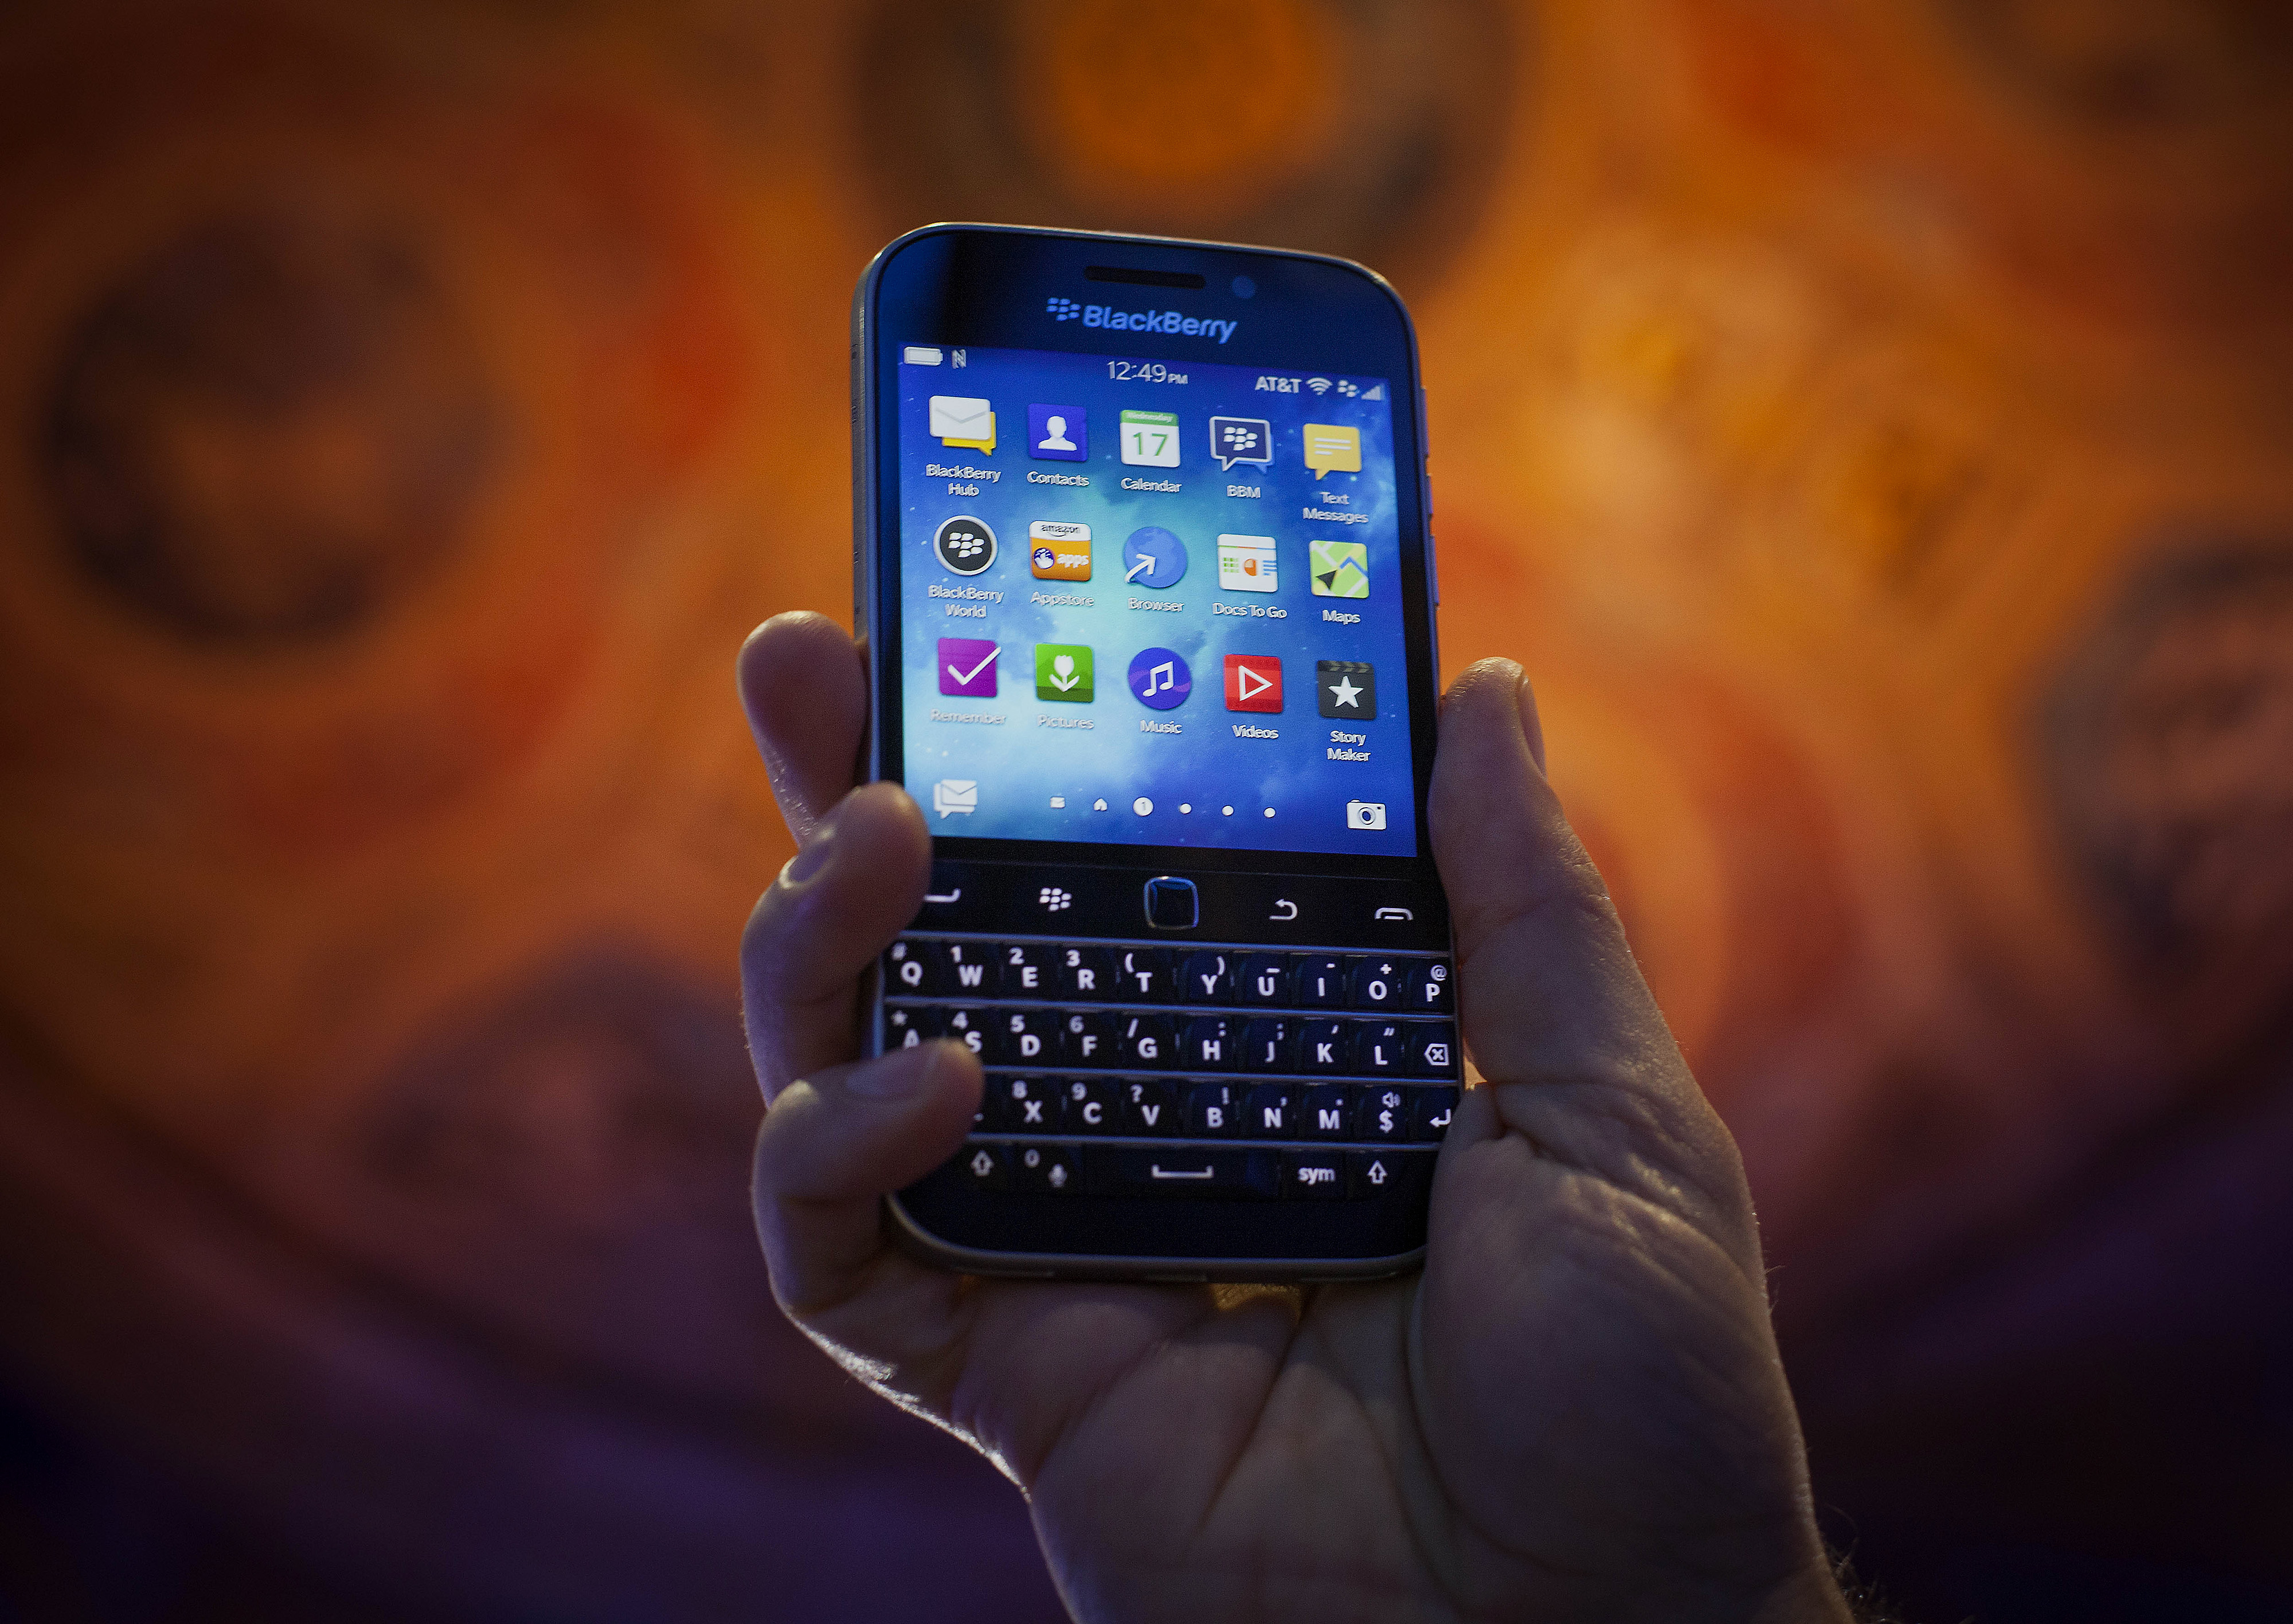 The BlackBerry Ltd. Classic smartphone is displayed for a photograph during an event in New York, U.S., on Wednesday, Dec. 17, 2014. (Bloomberg&mdash;Bloomberg via Getty Images)